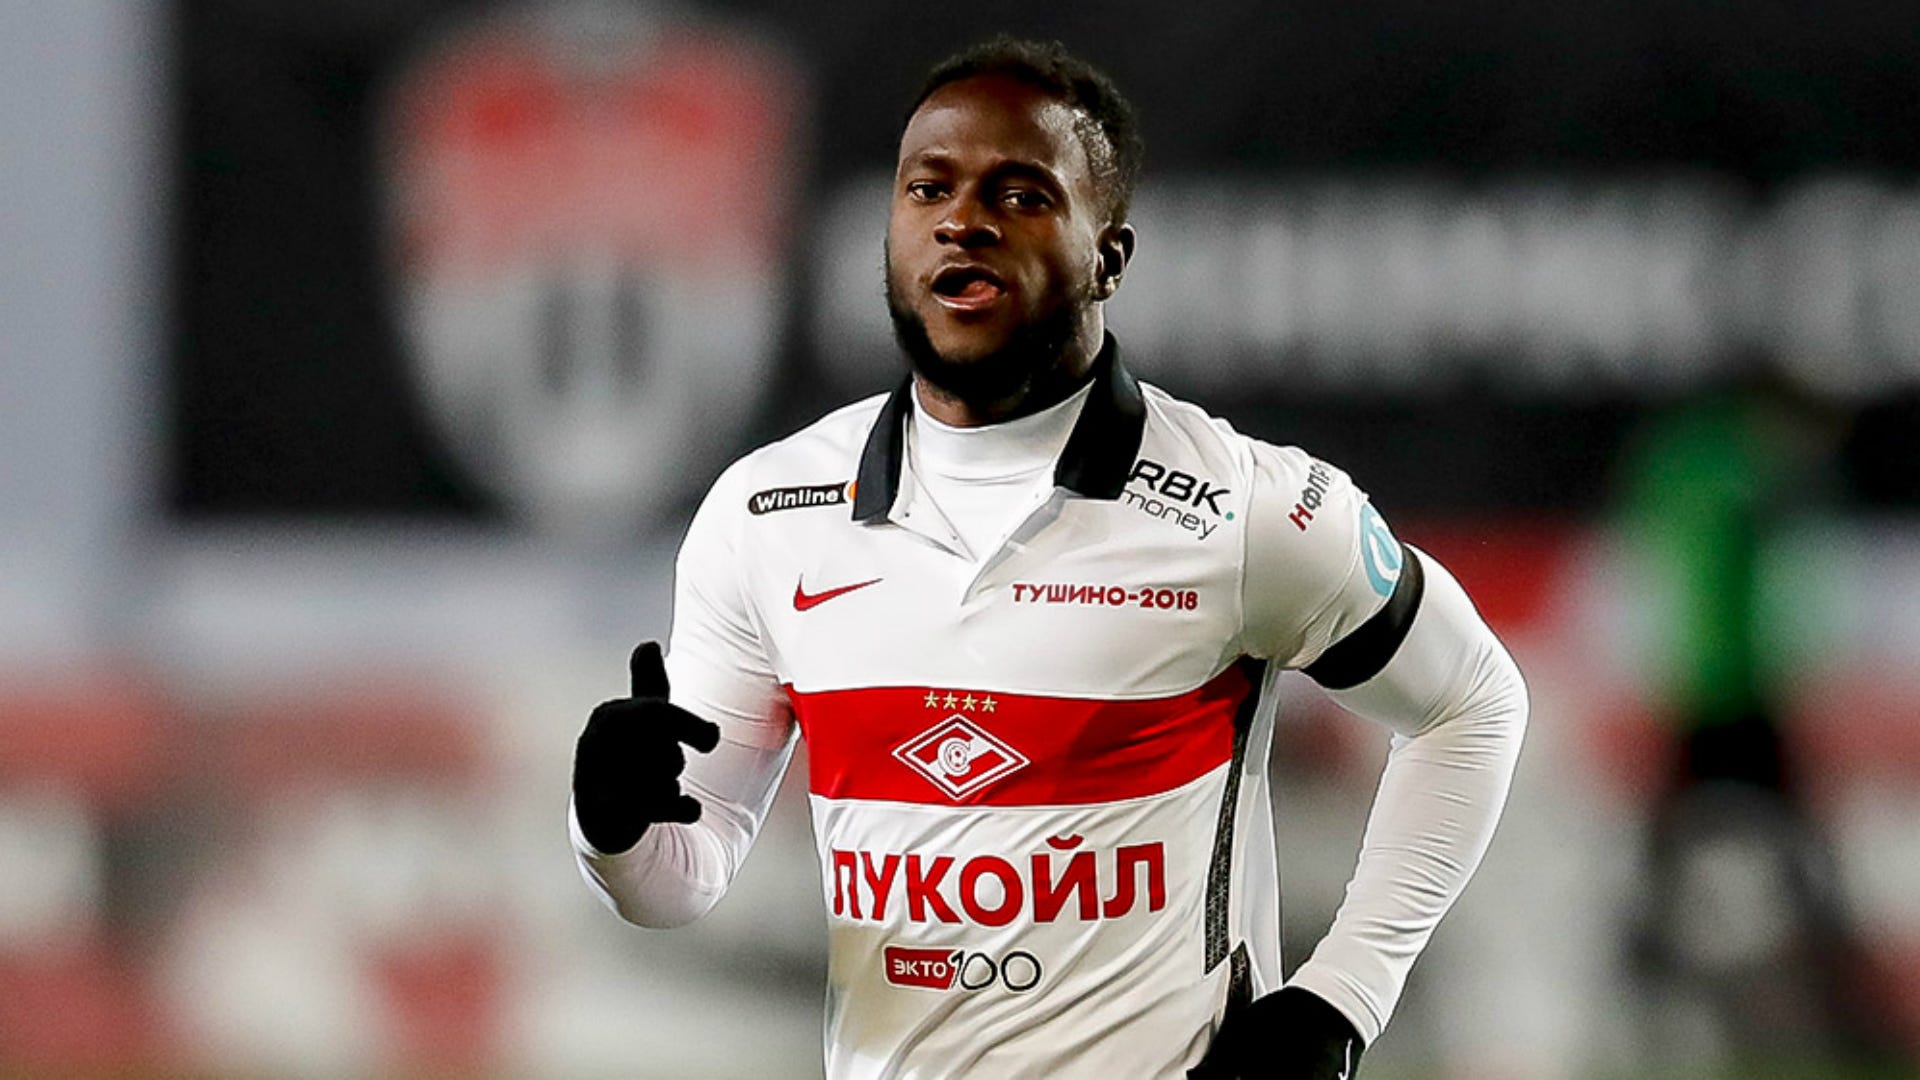 Spartak Moscow confirm conditions met for Victor Moses €5m